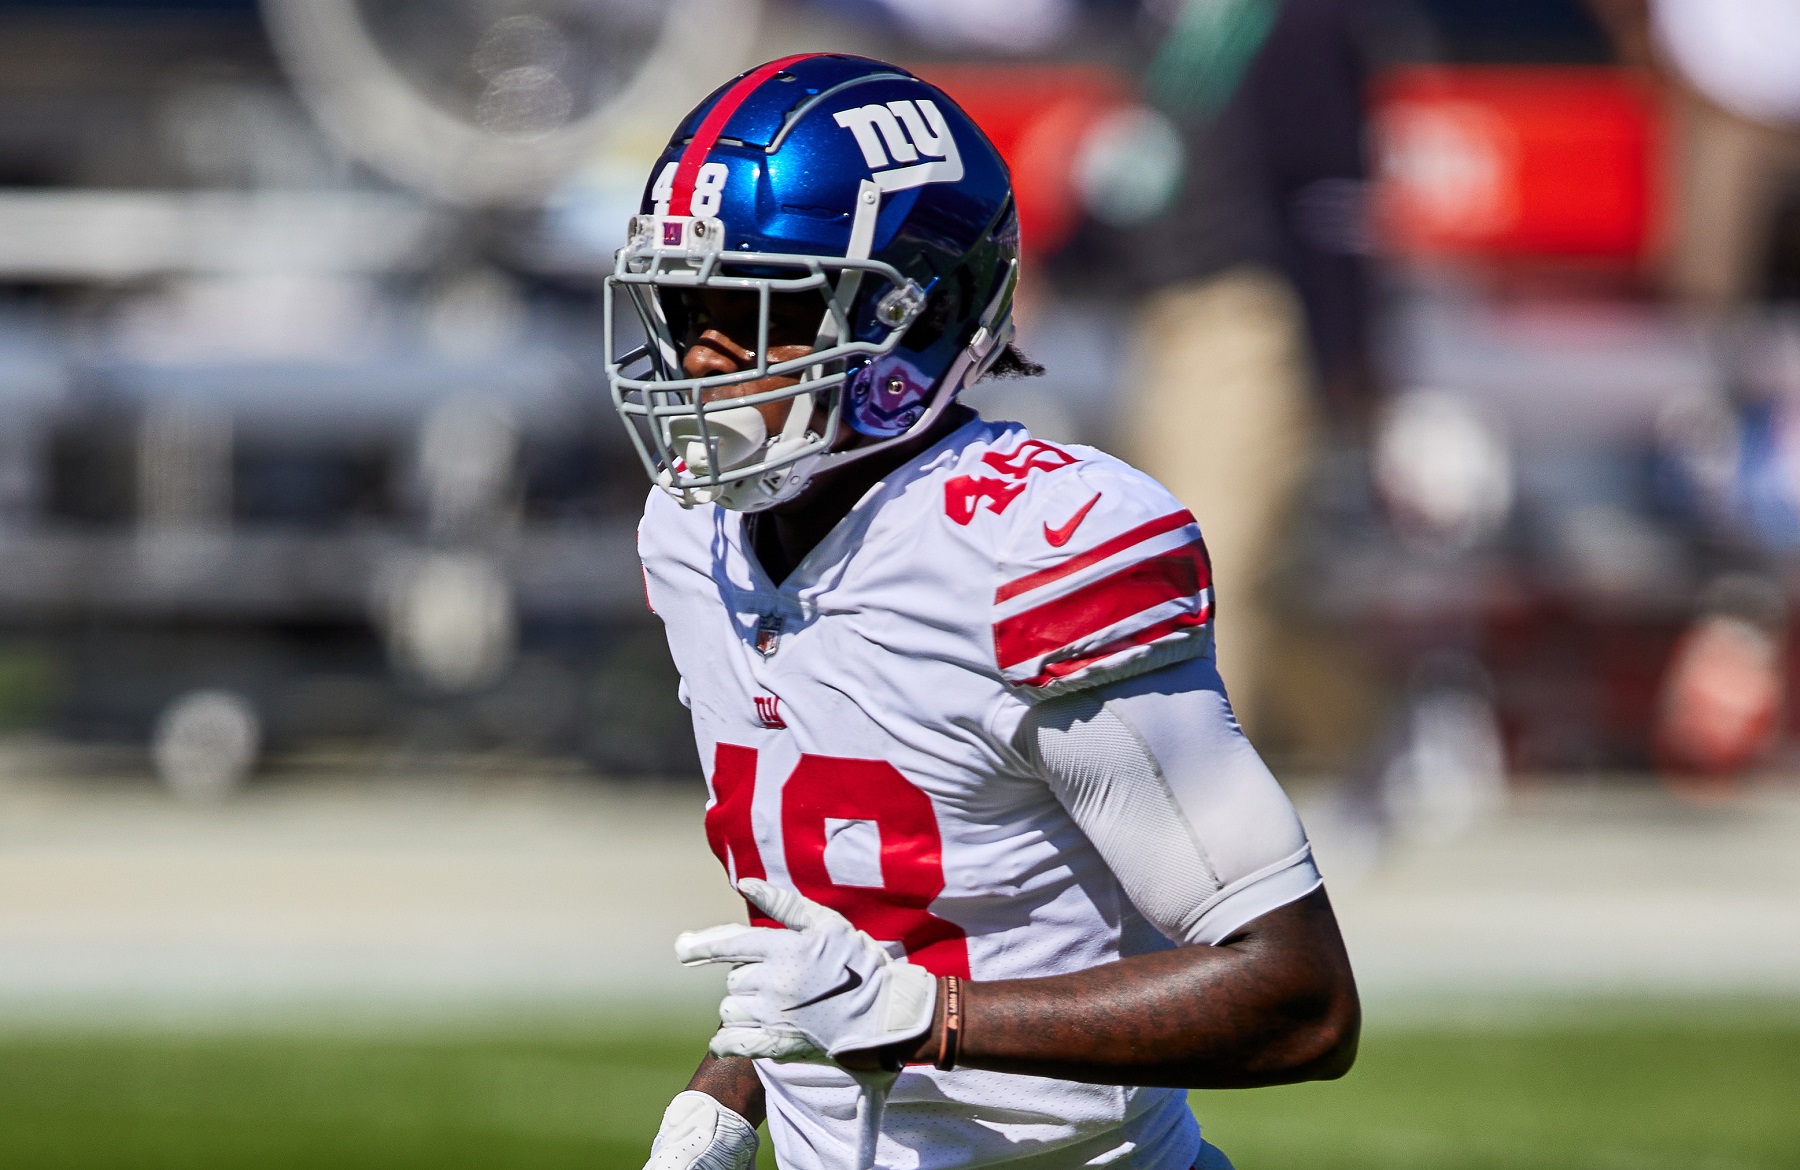 Giants Rookie Tae Crowder Pulled off a Feat No NFL Player Has Matched This Century